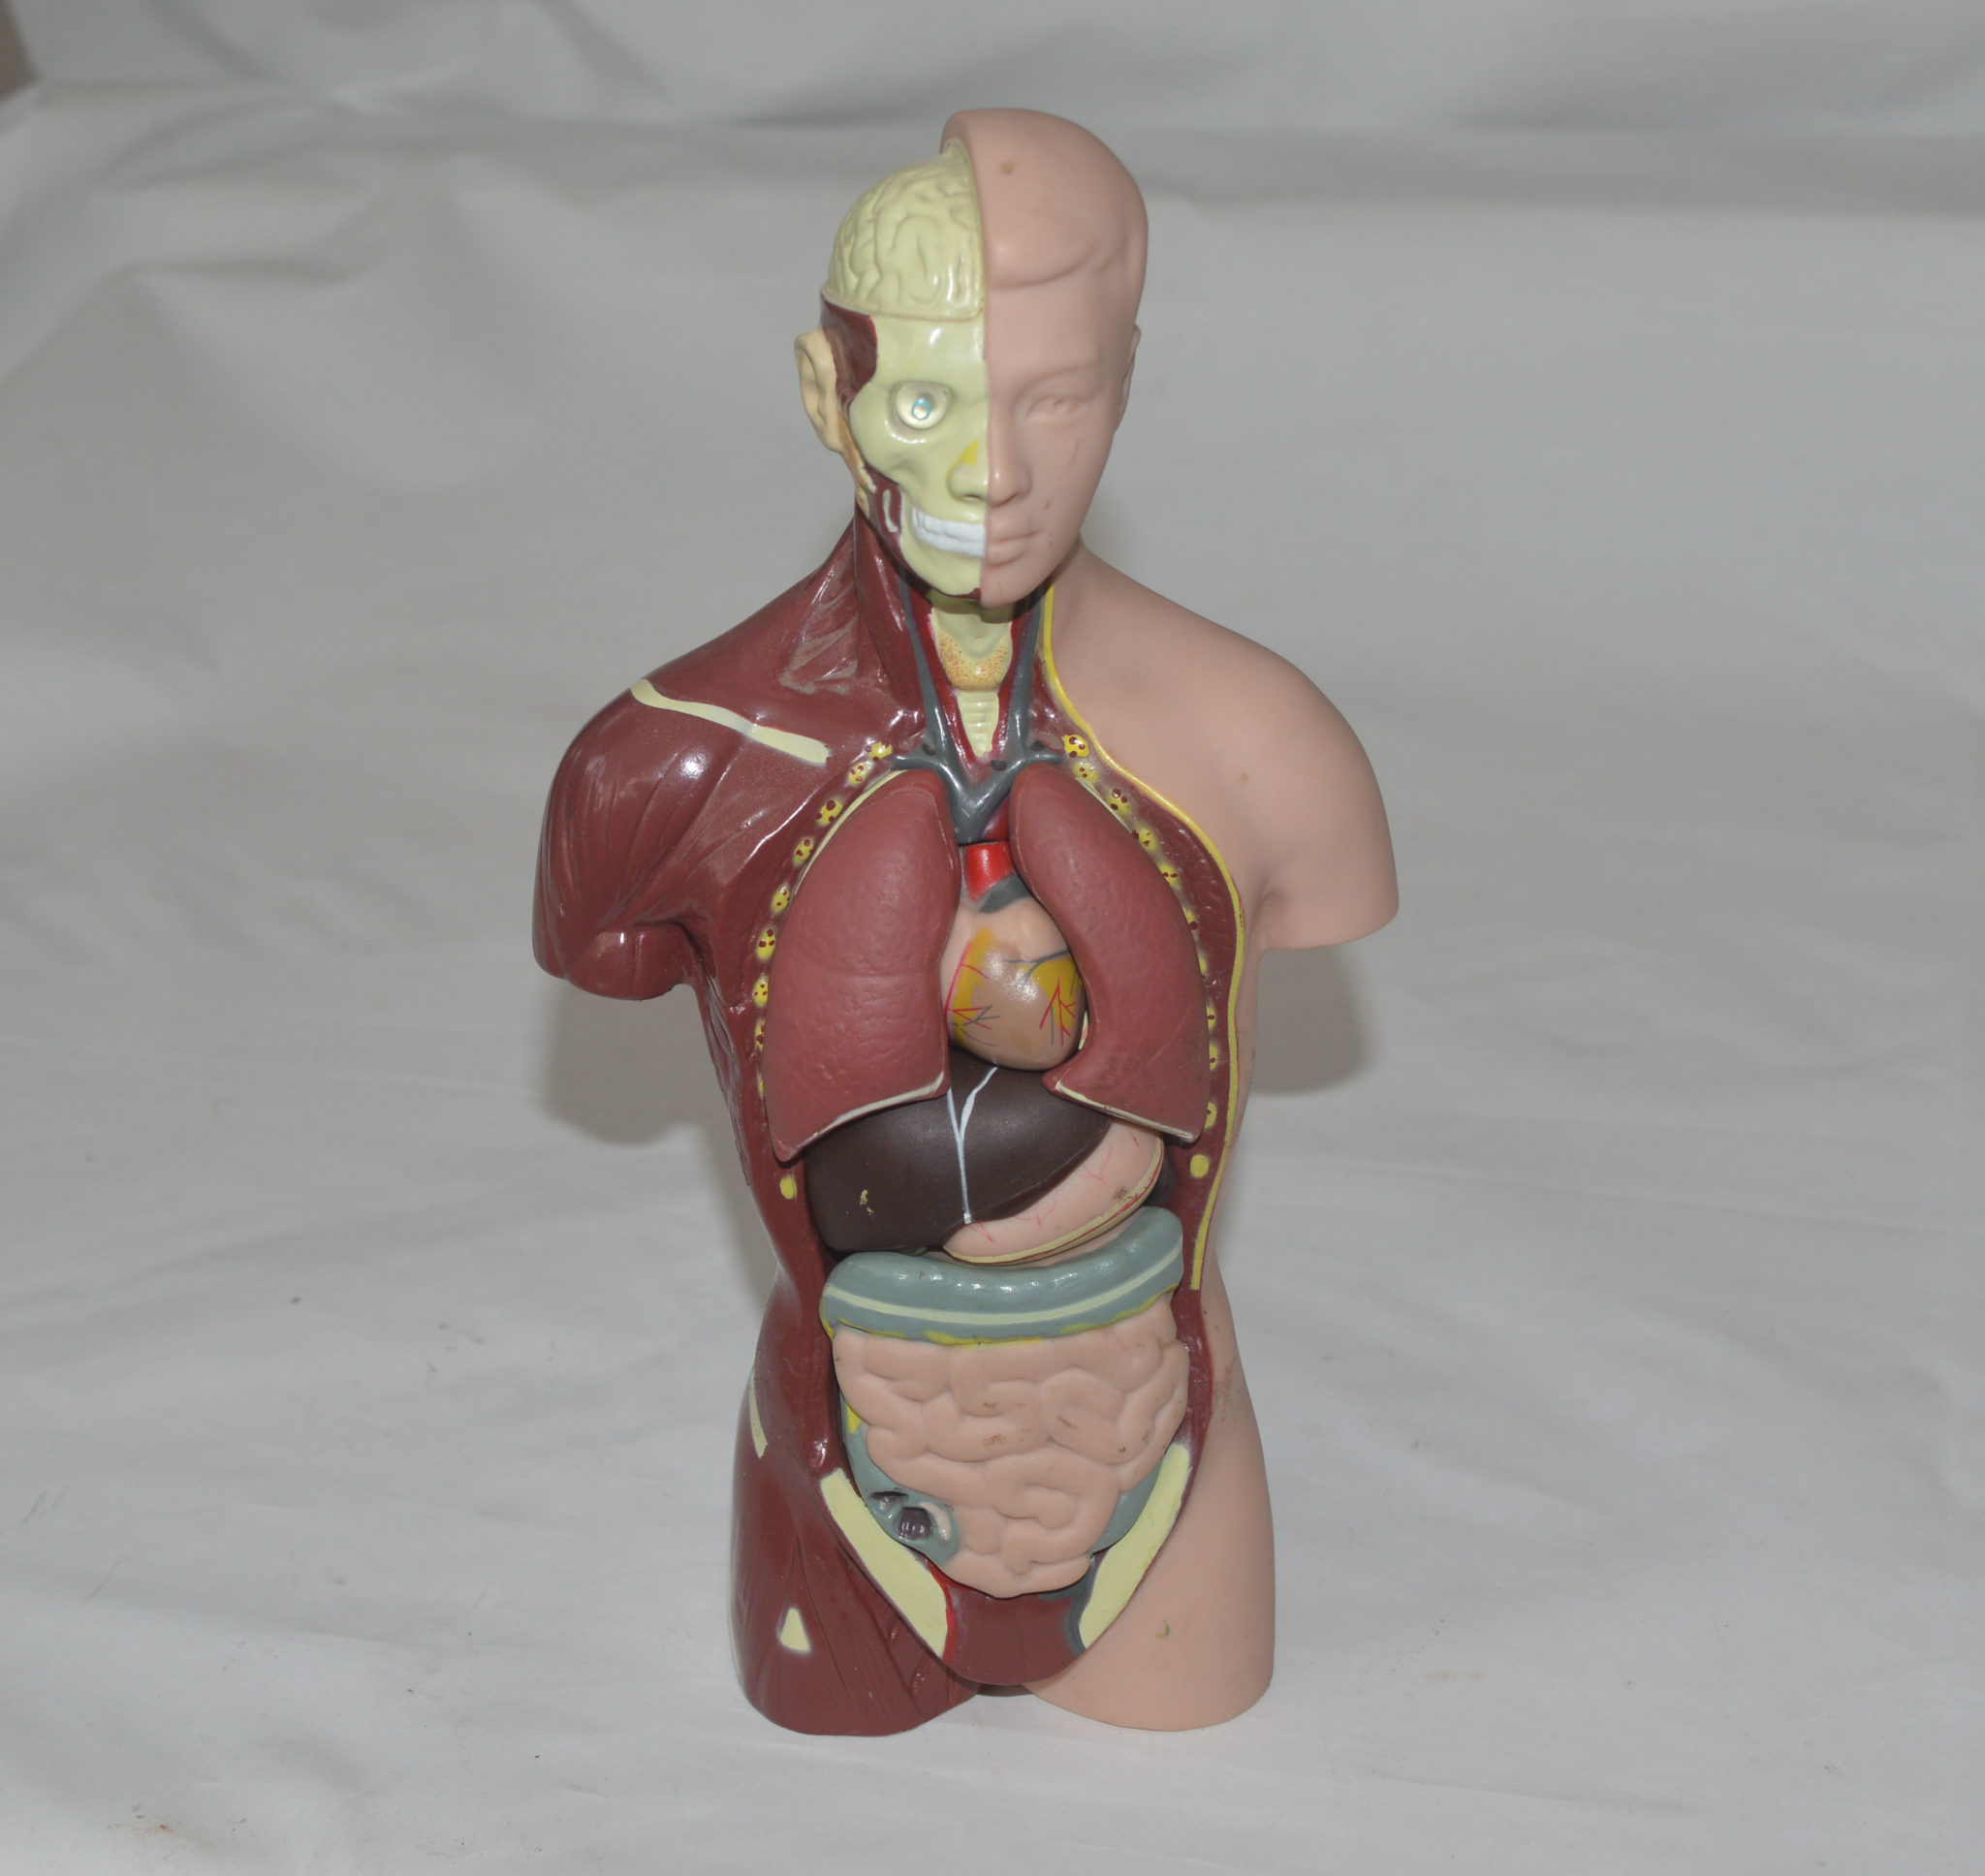 Vintage Plastic / Rubber Anatomical Figure With Removable Organs.